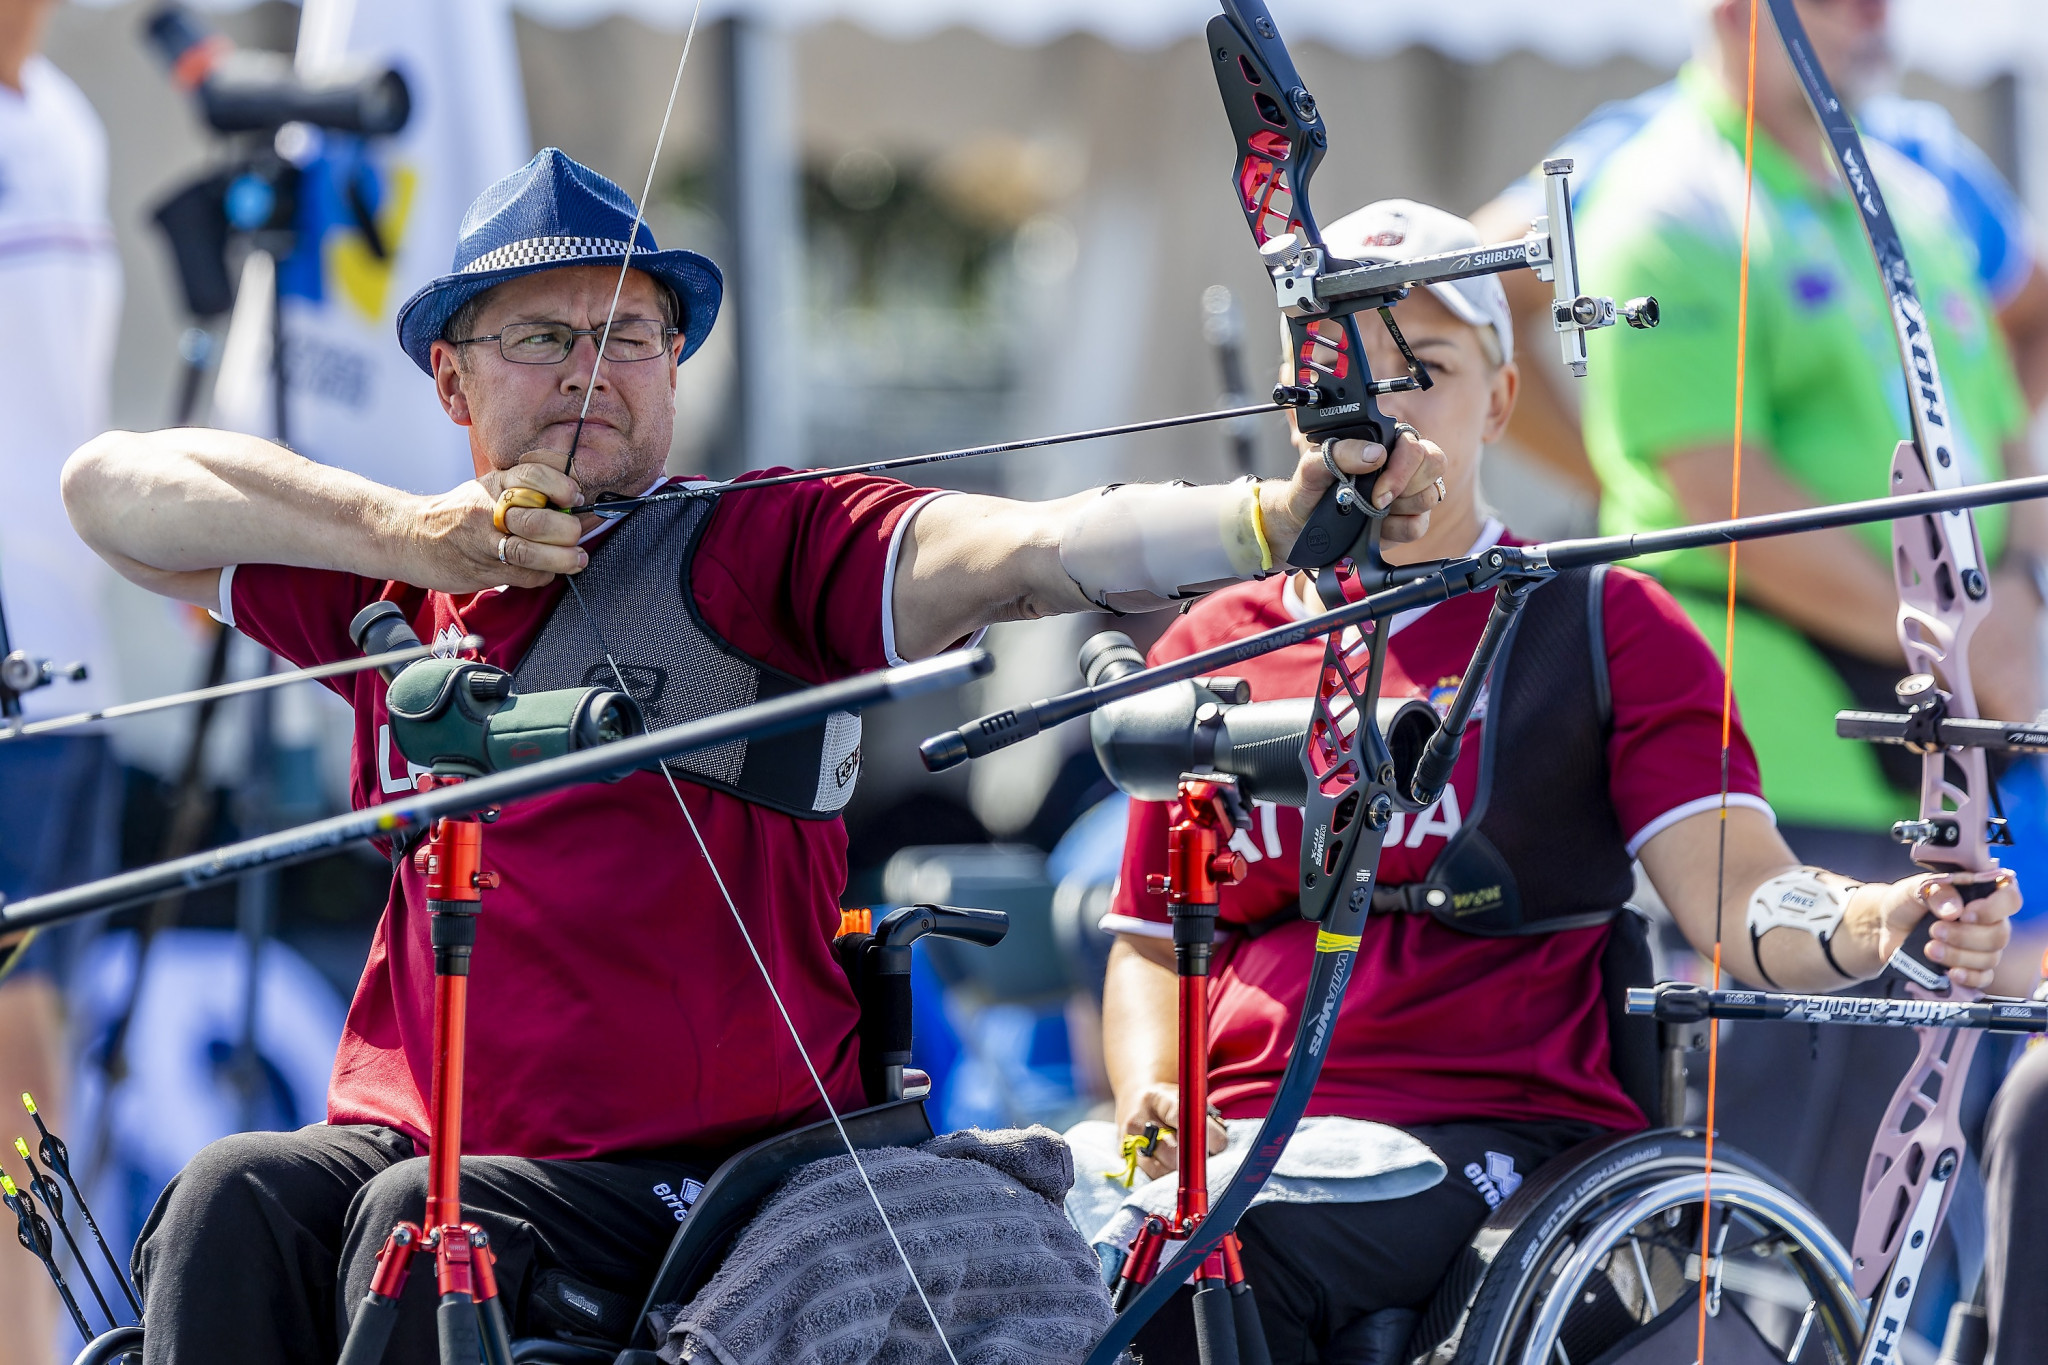 Latvia was among the nations represented in a packed field of Para archers ©EPC